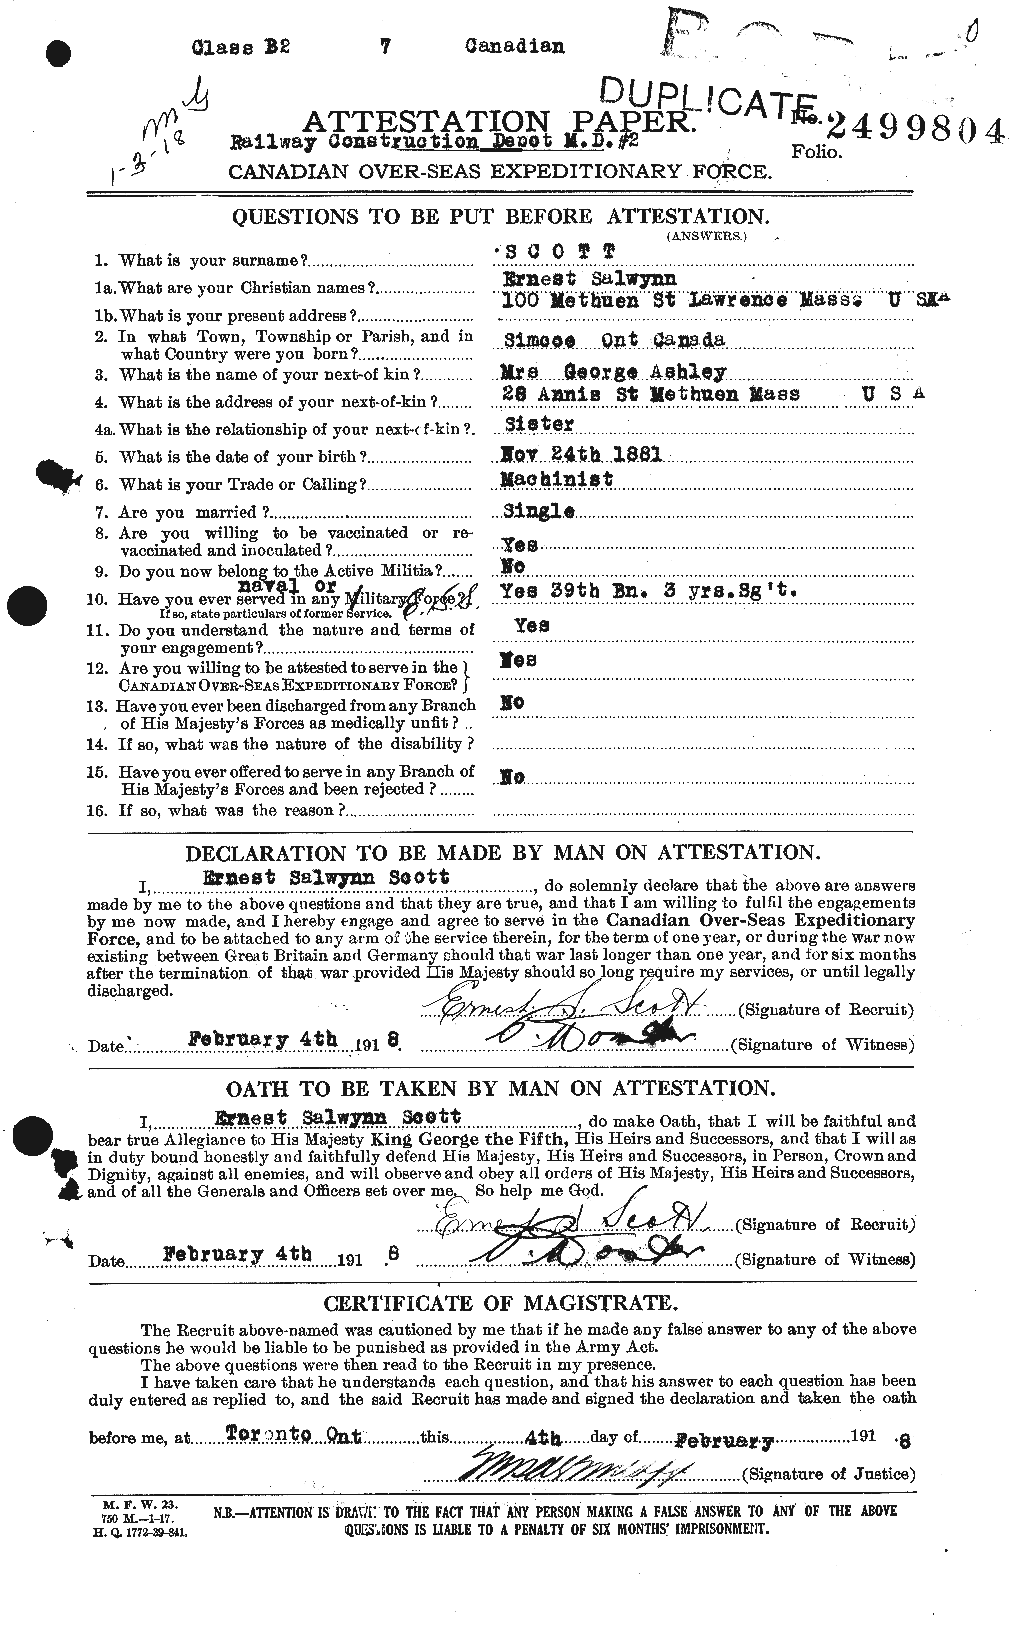 Personnel Records of the First World War - CEF 085004a